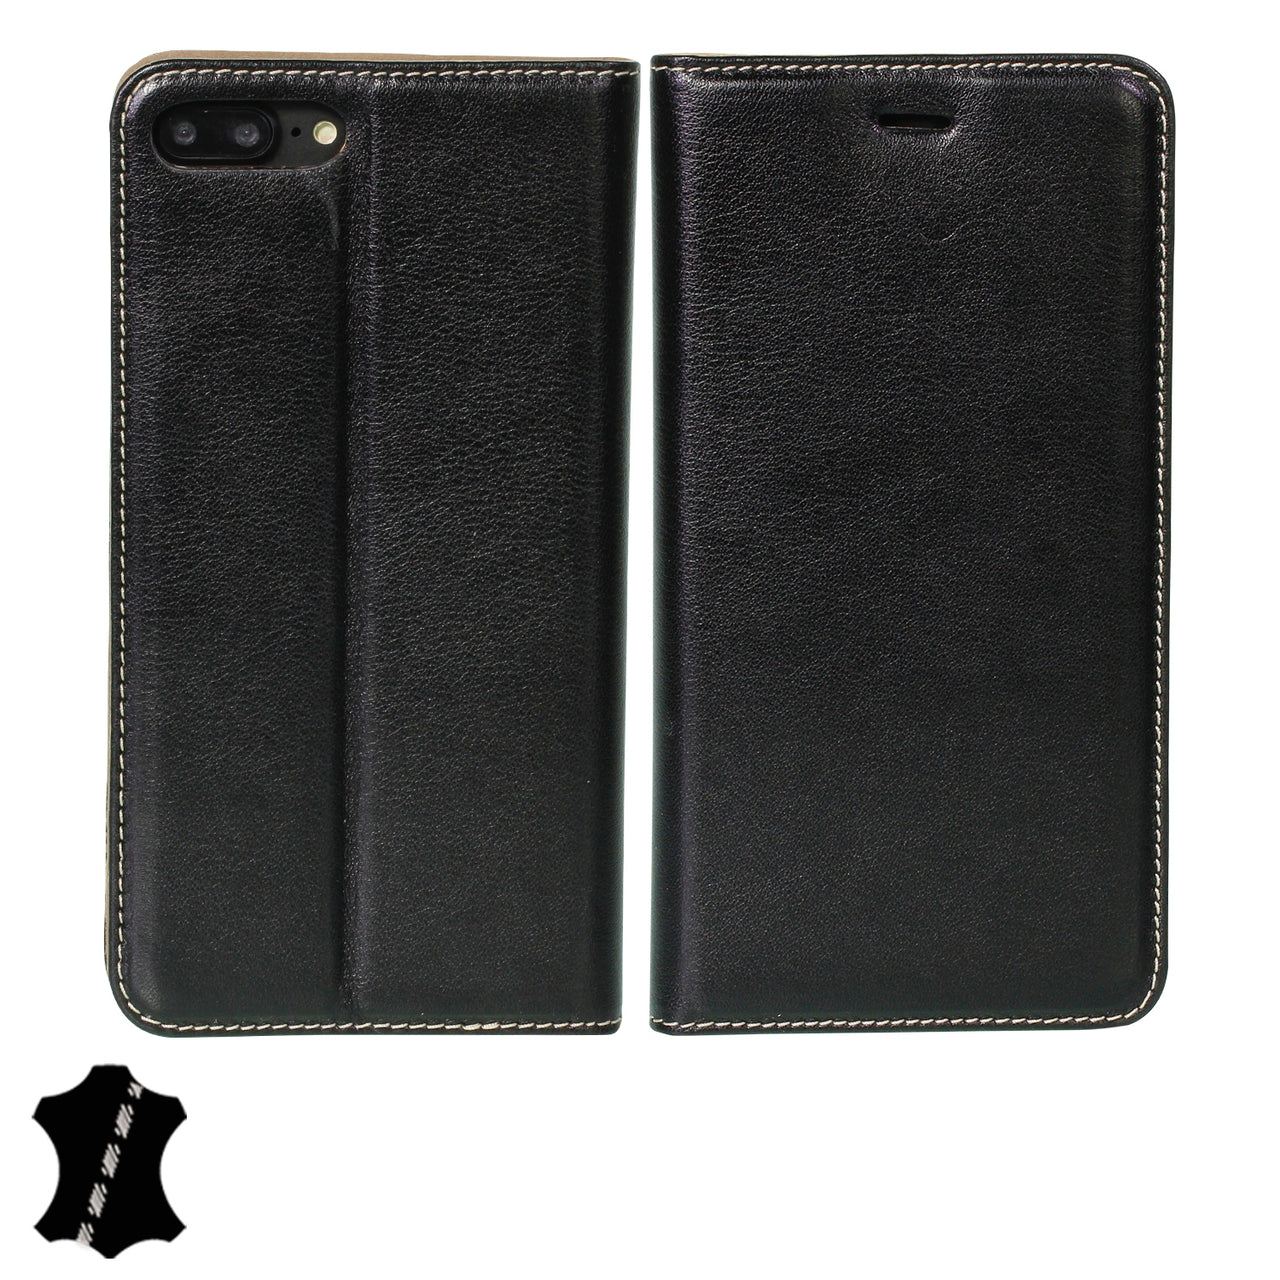 iPhone 7 Plus / 8 Plus Genuine Leather Case with Stand | Artisancover